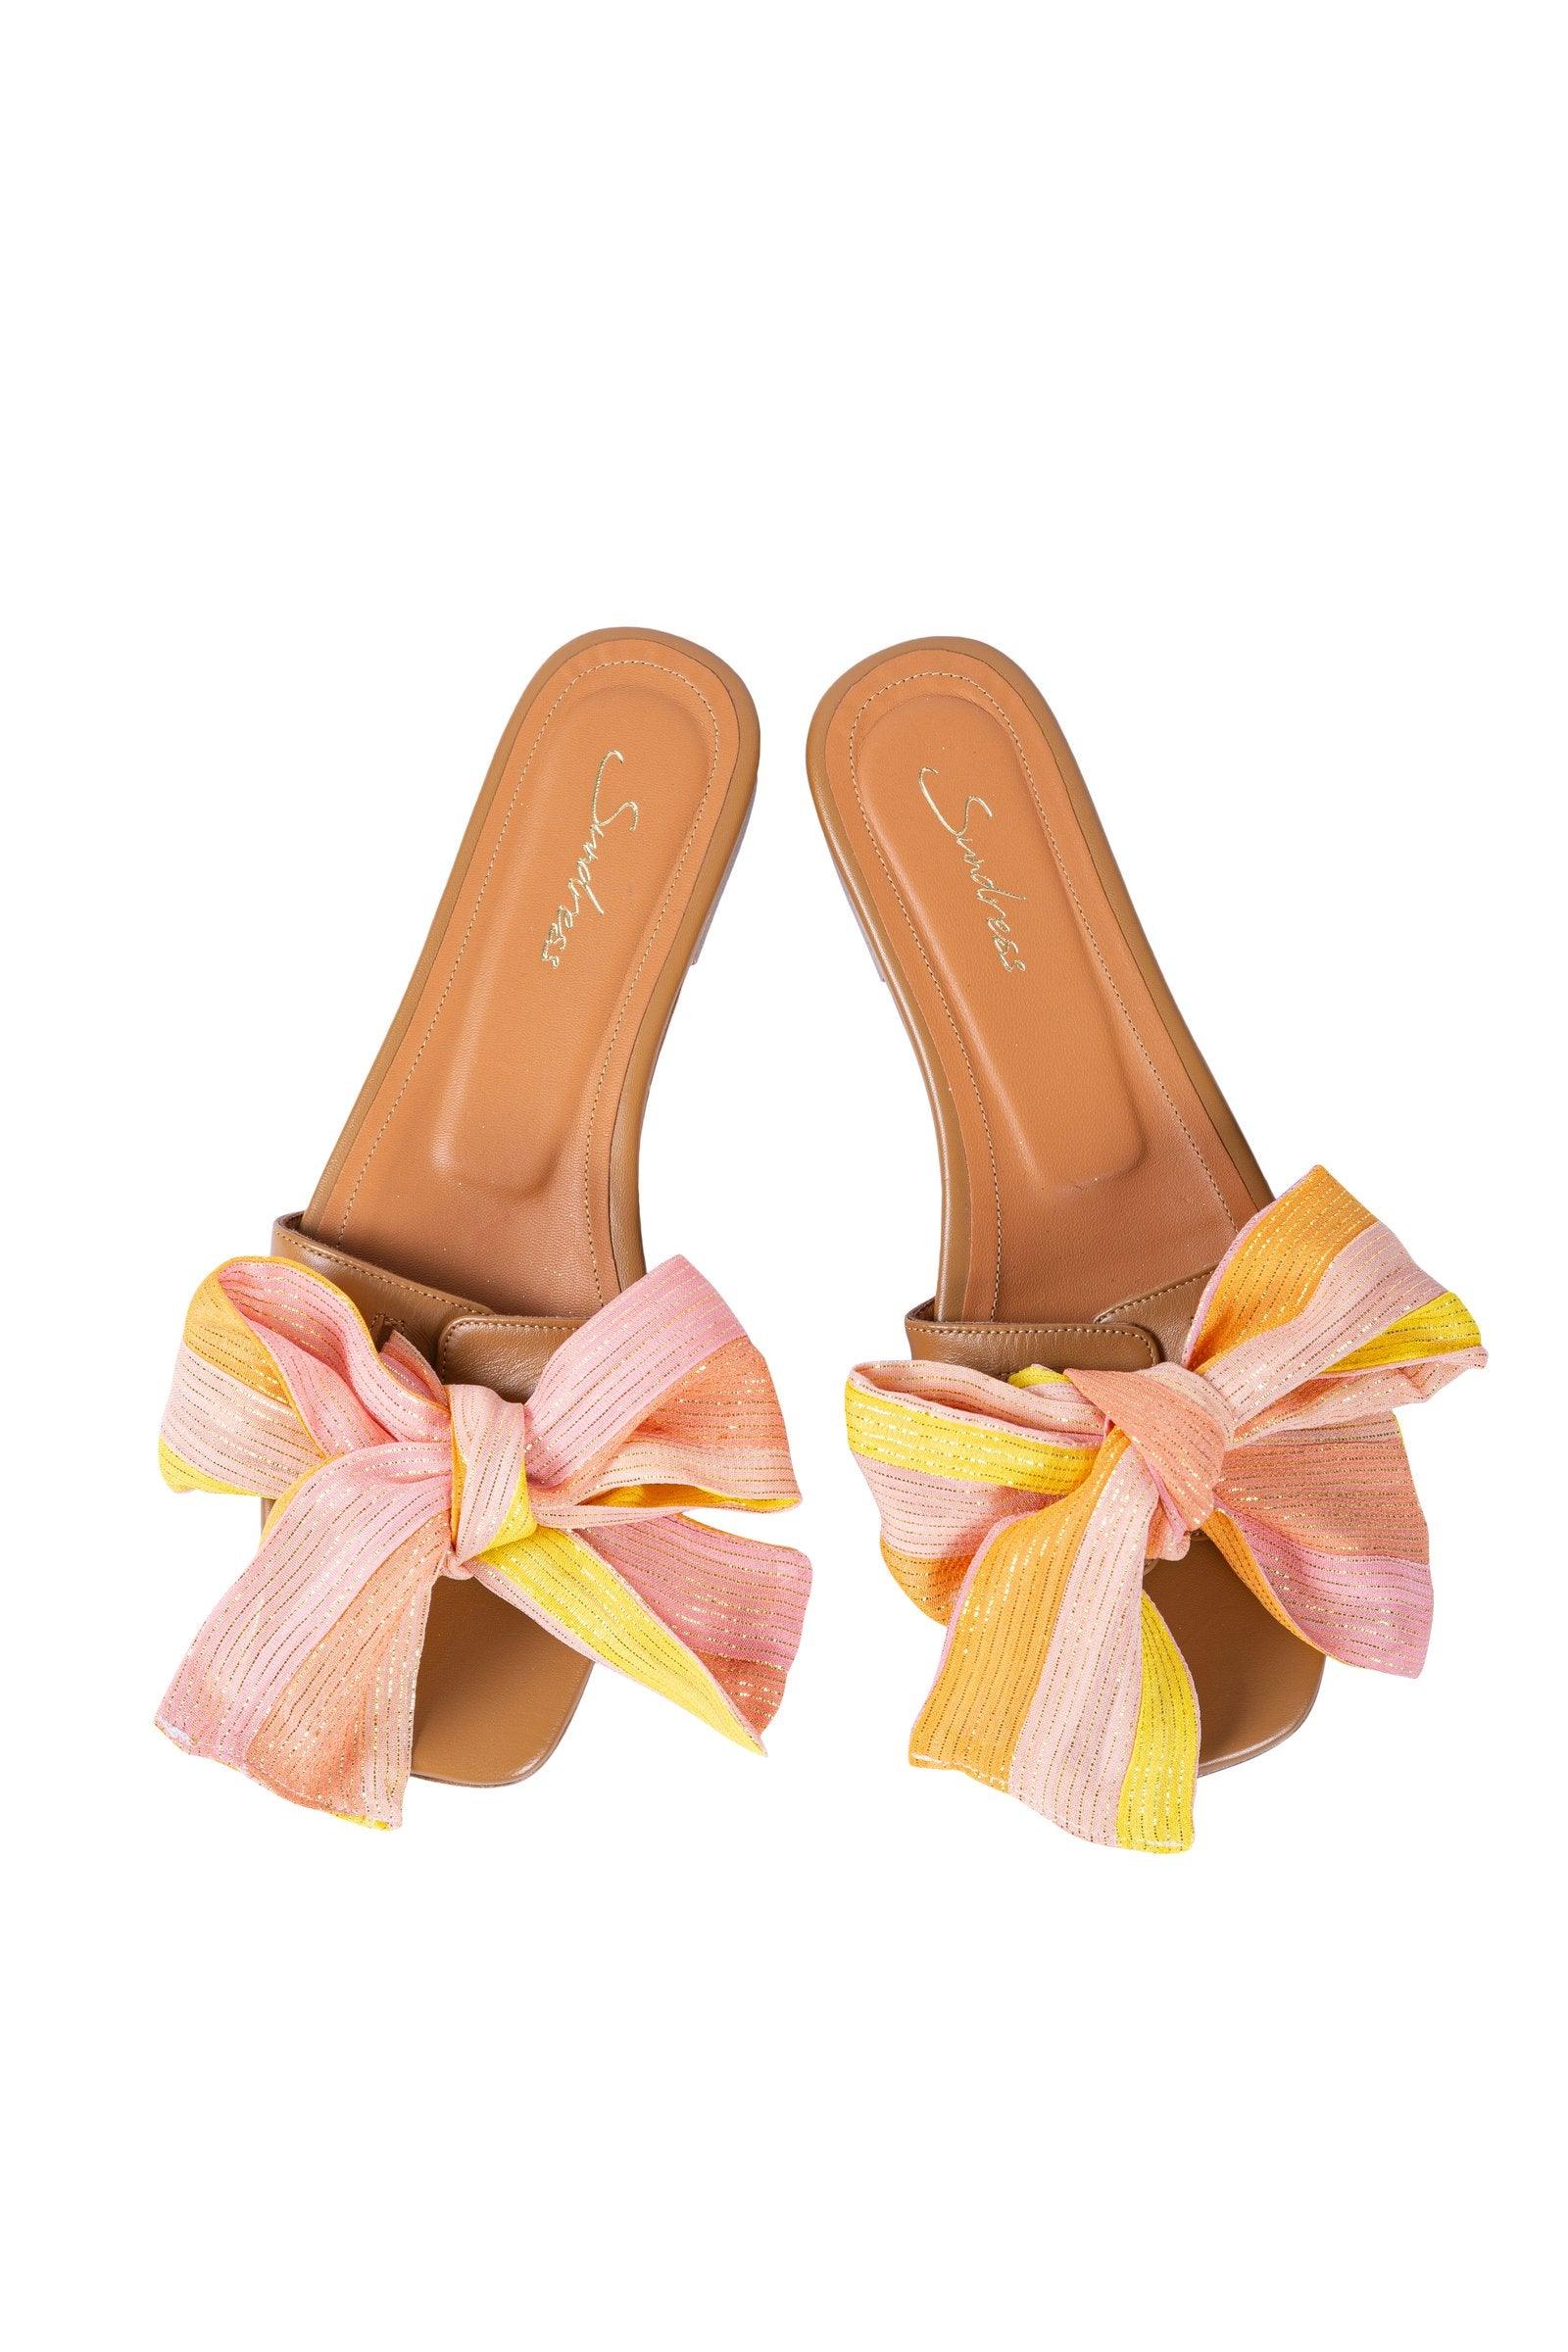 Sundress - Amour Sandals in Rainbow & Nude Ties - OutDazl